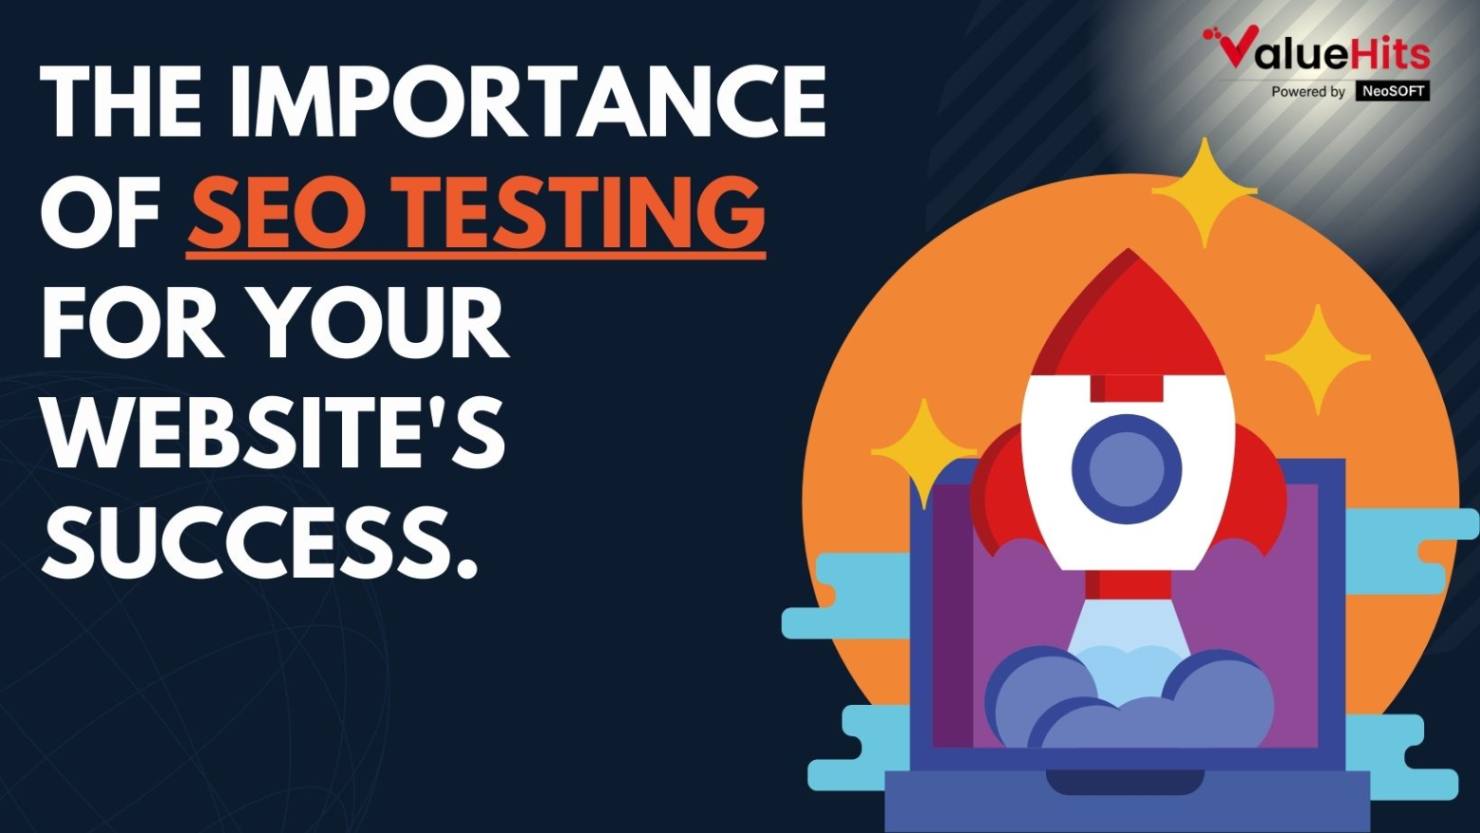 The Importance of SEO Testing for Your Websites Success